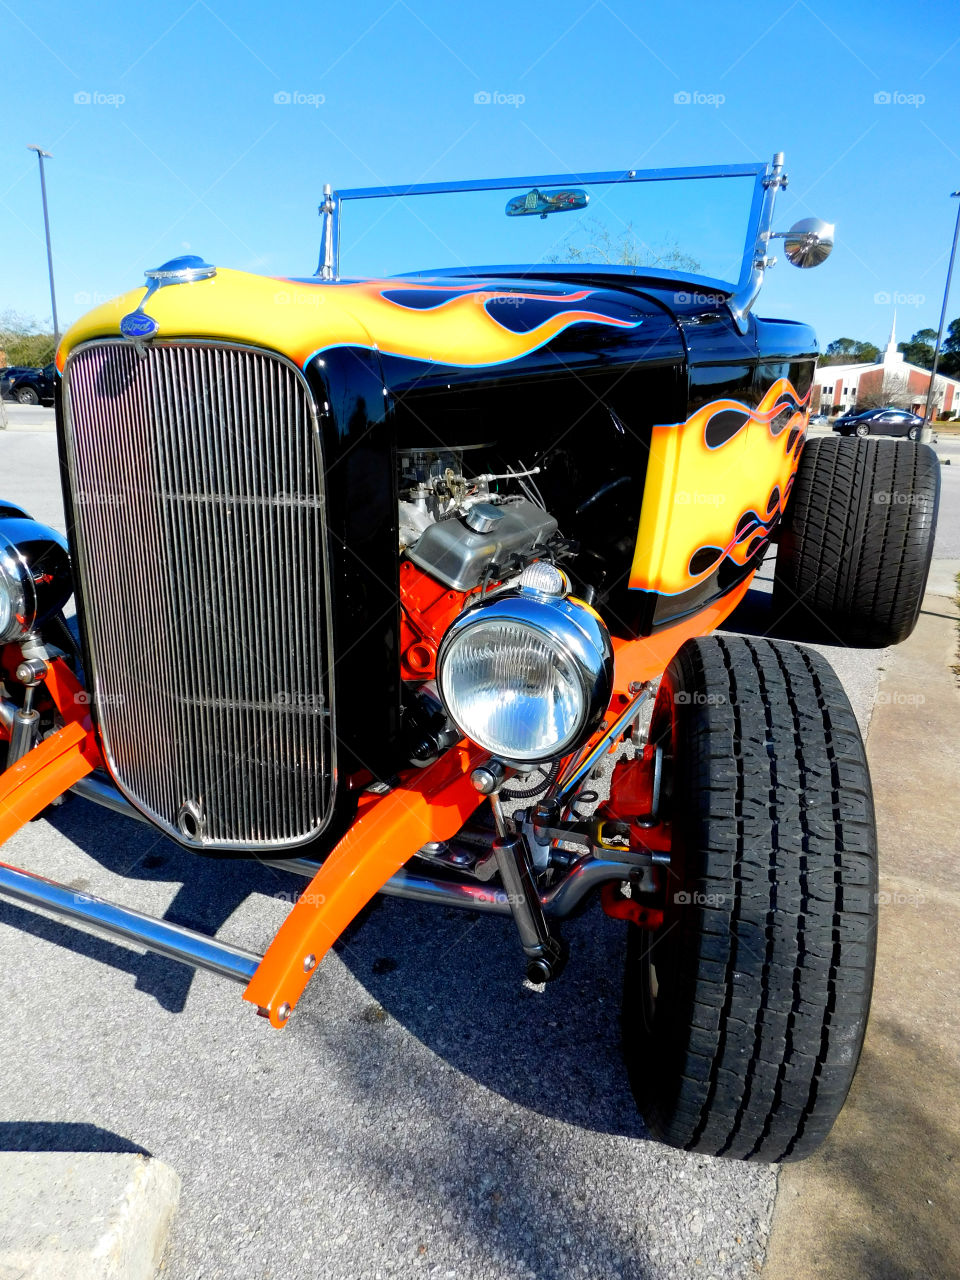 1932 Ford Hi-Boy Roadster parked in the church parking lot! Powered by a powerful 383 Stroker V8!